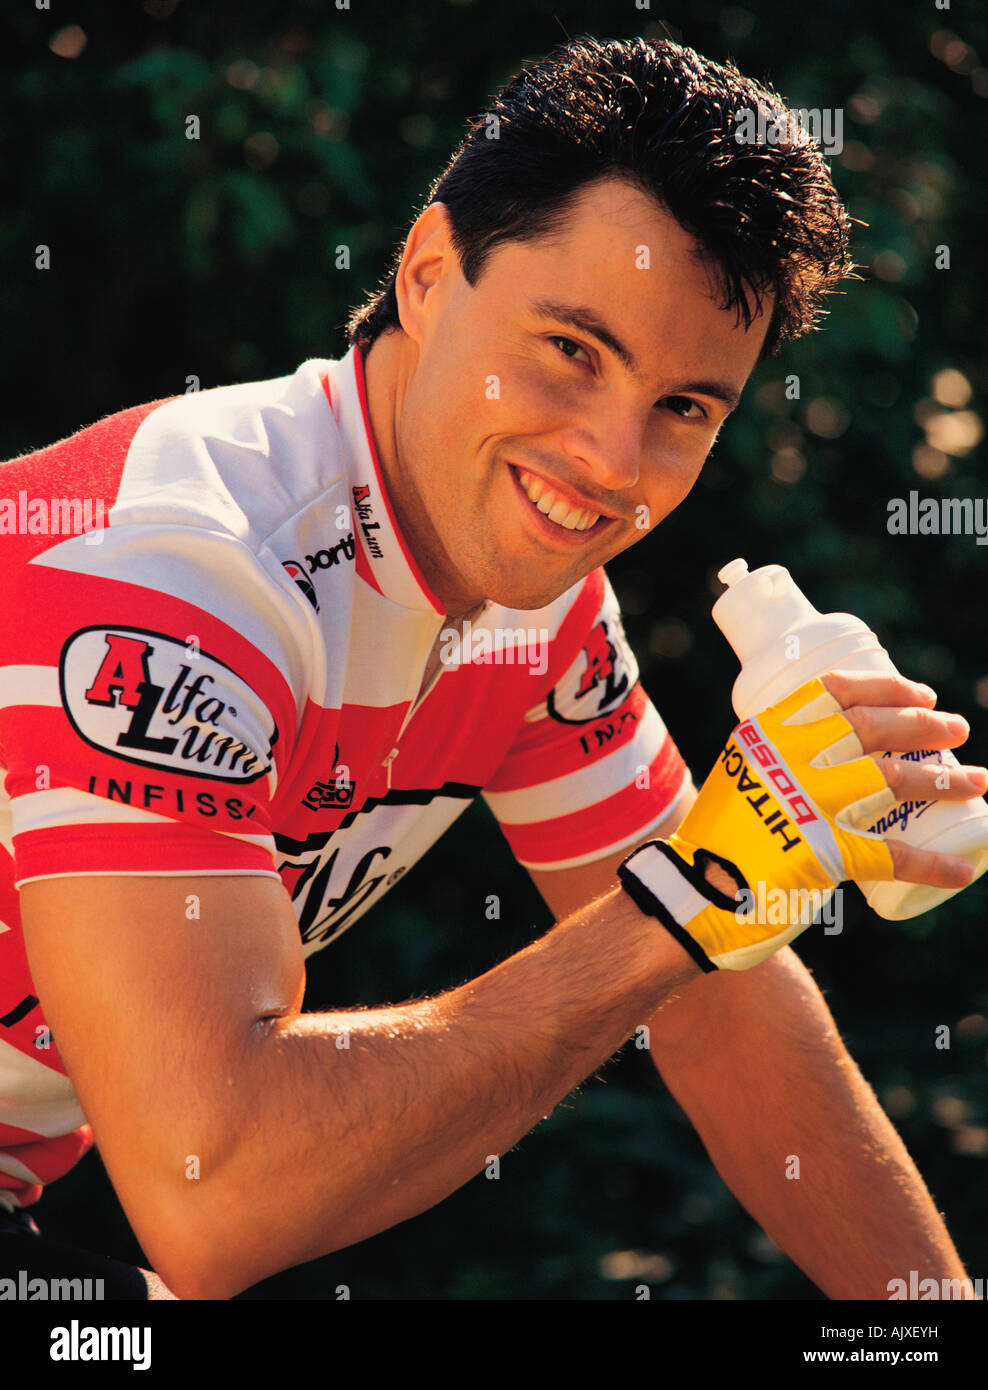 Outdoor portrait of young man cyclist close-up with bottle of drink. Stock Photo